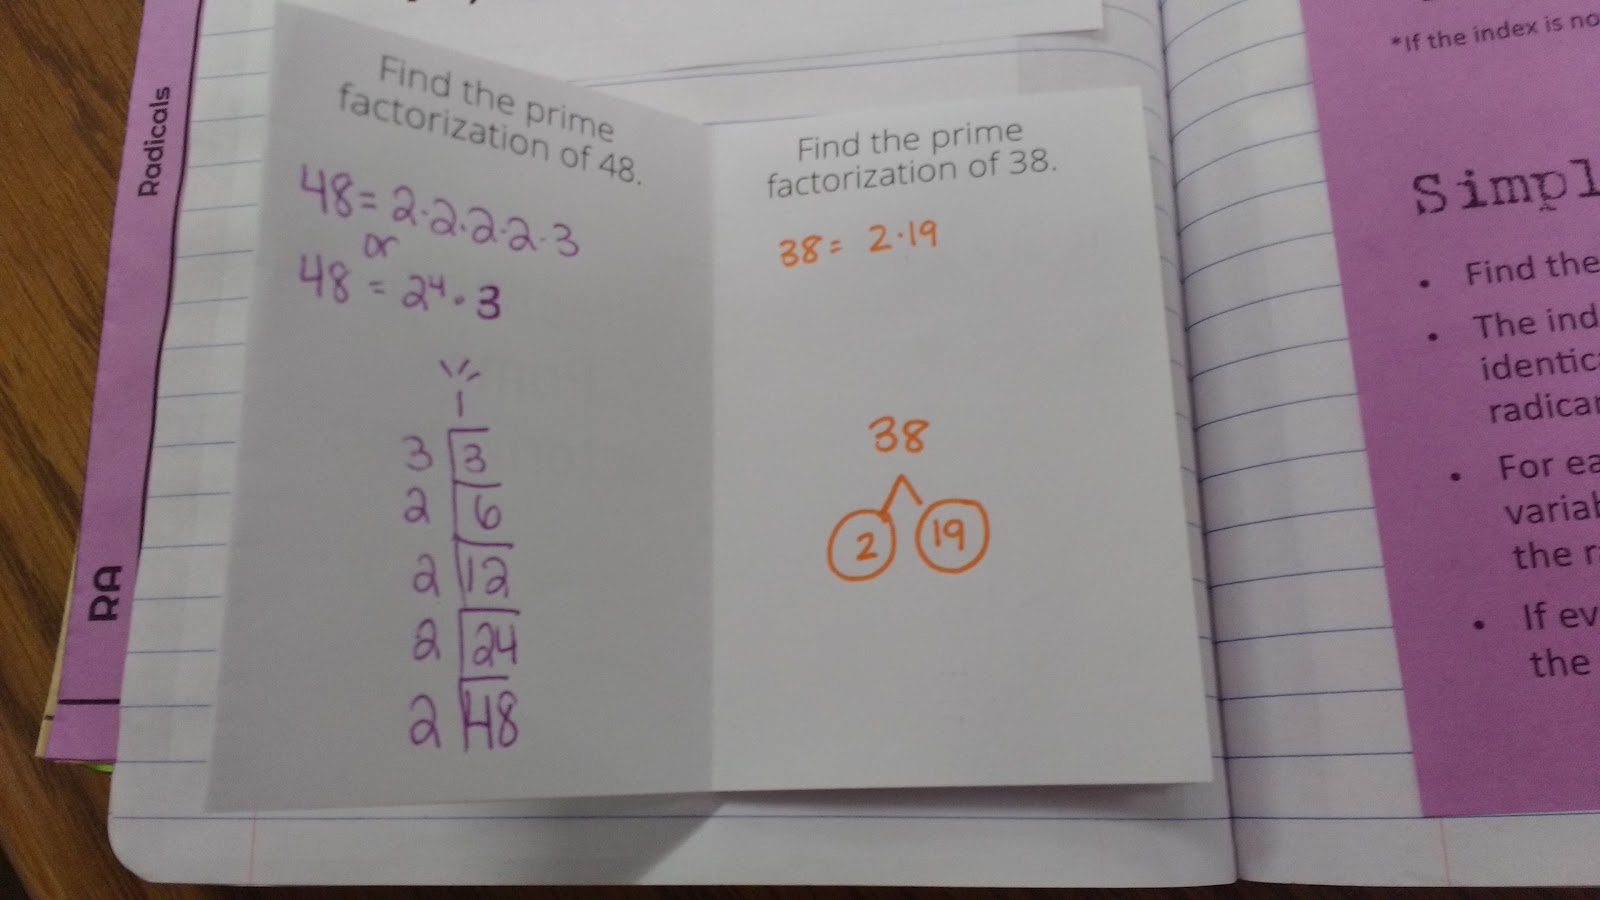 Inside Page of Prime Factorization Practice Book.